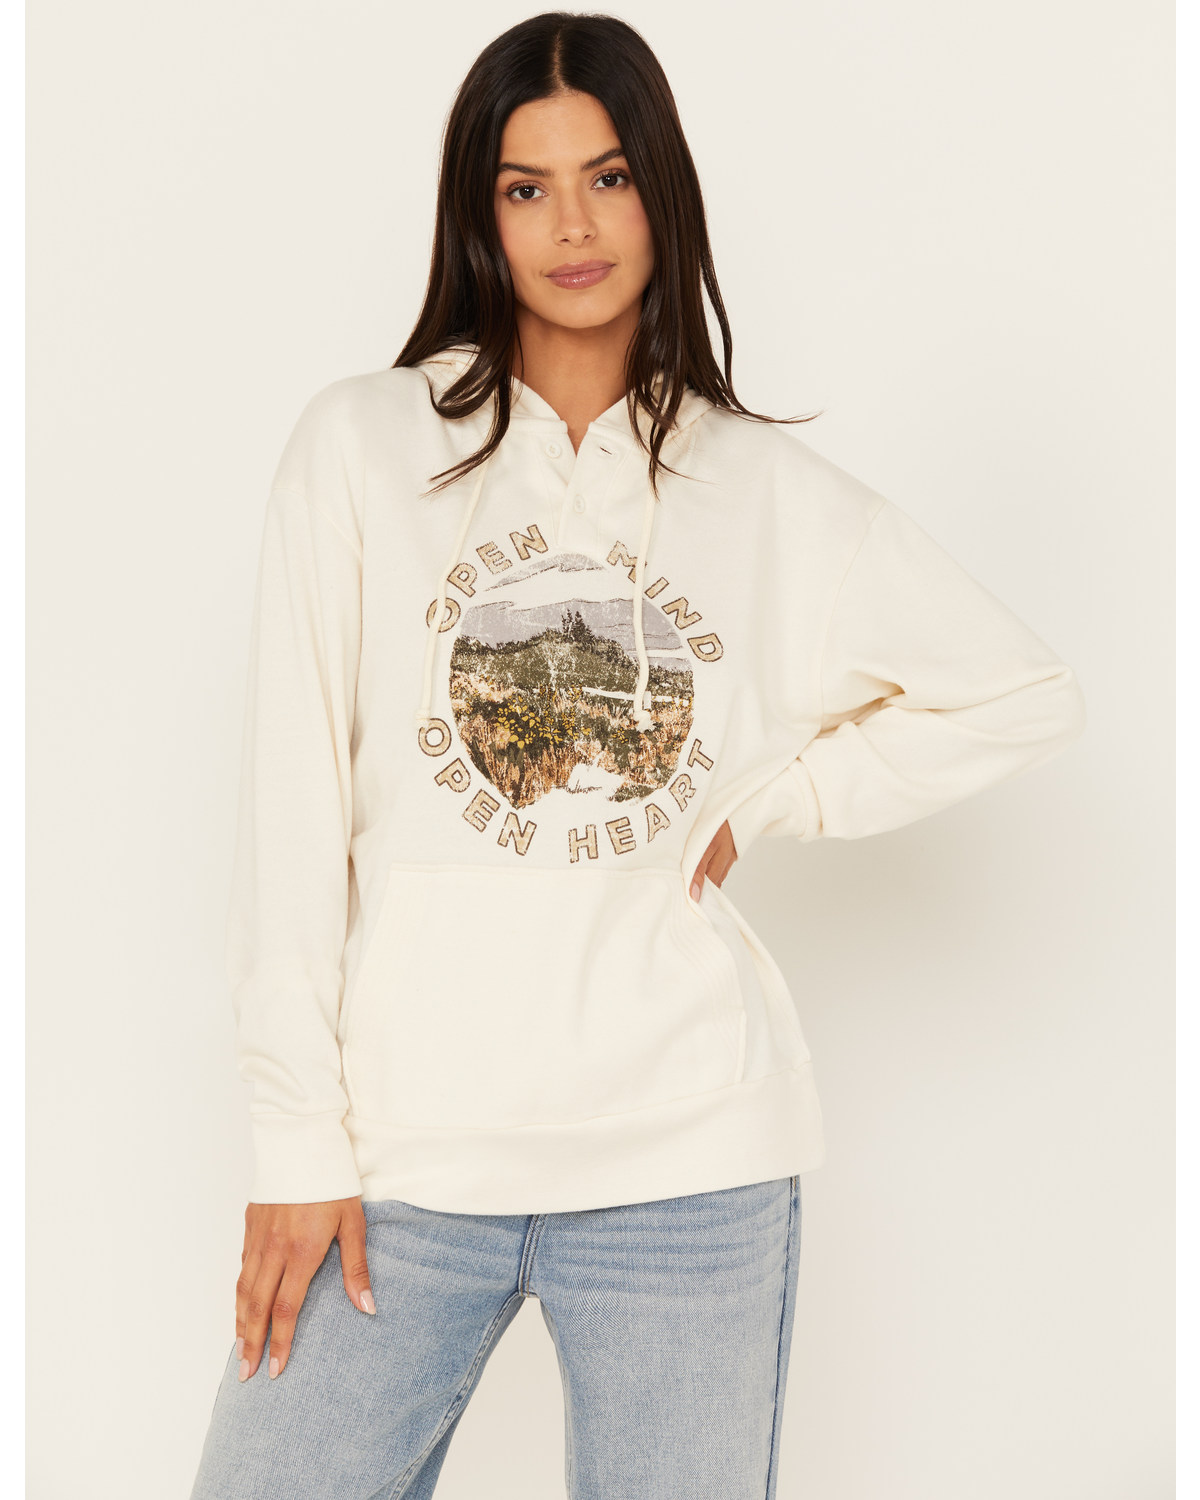 Cleo + Wolf Women's Graphic Henley Pullover